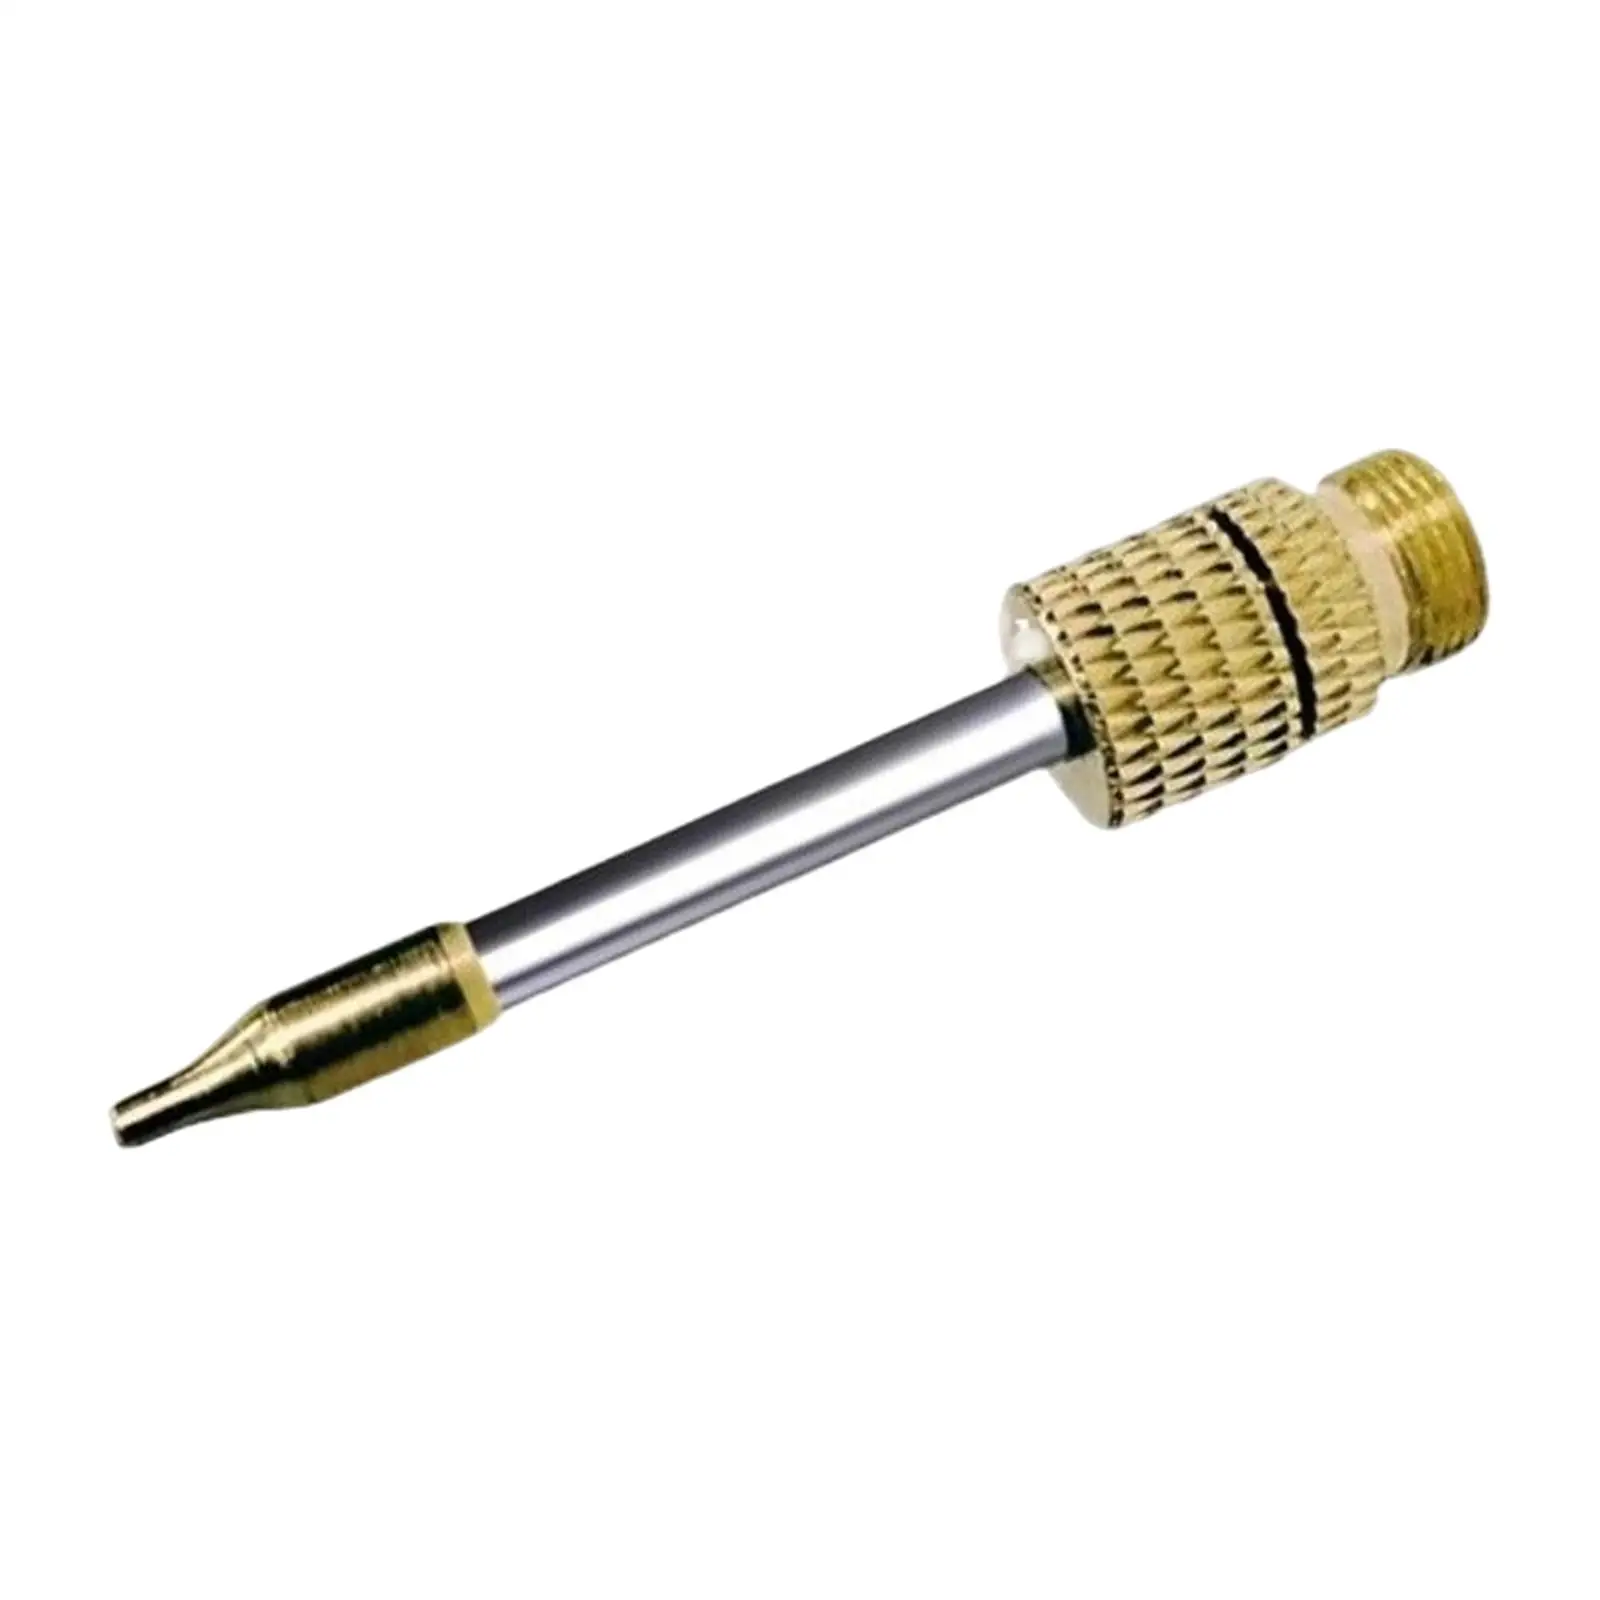 Welding Soldering Tips for Electric Solder Iron Replace Accessories Repair